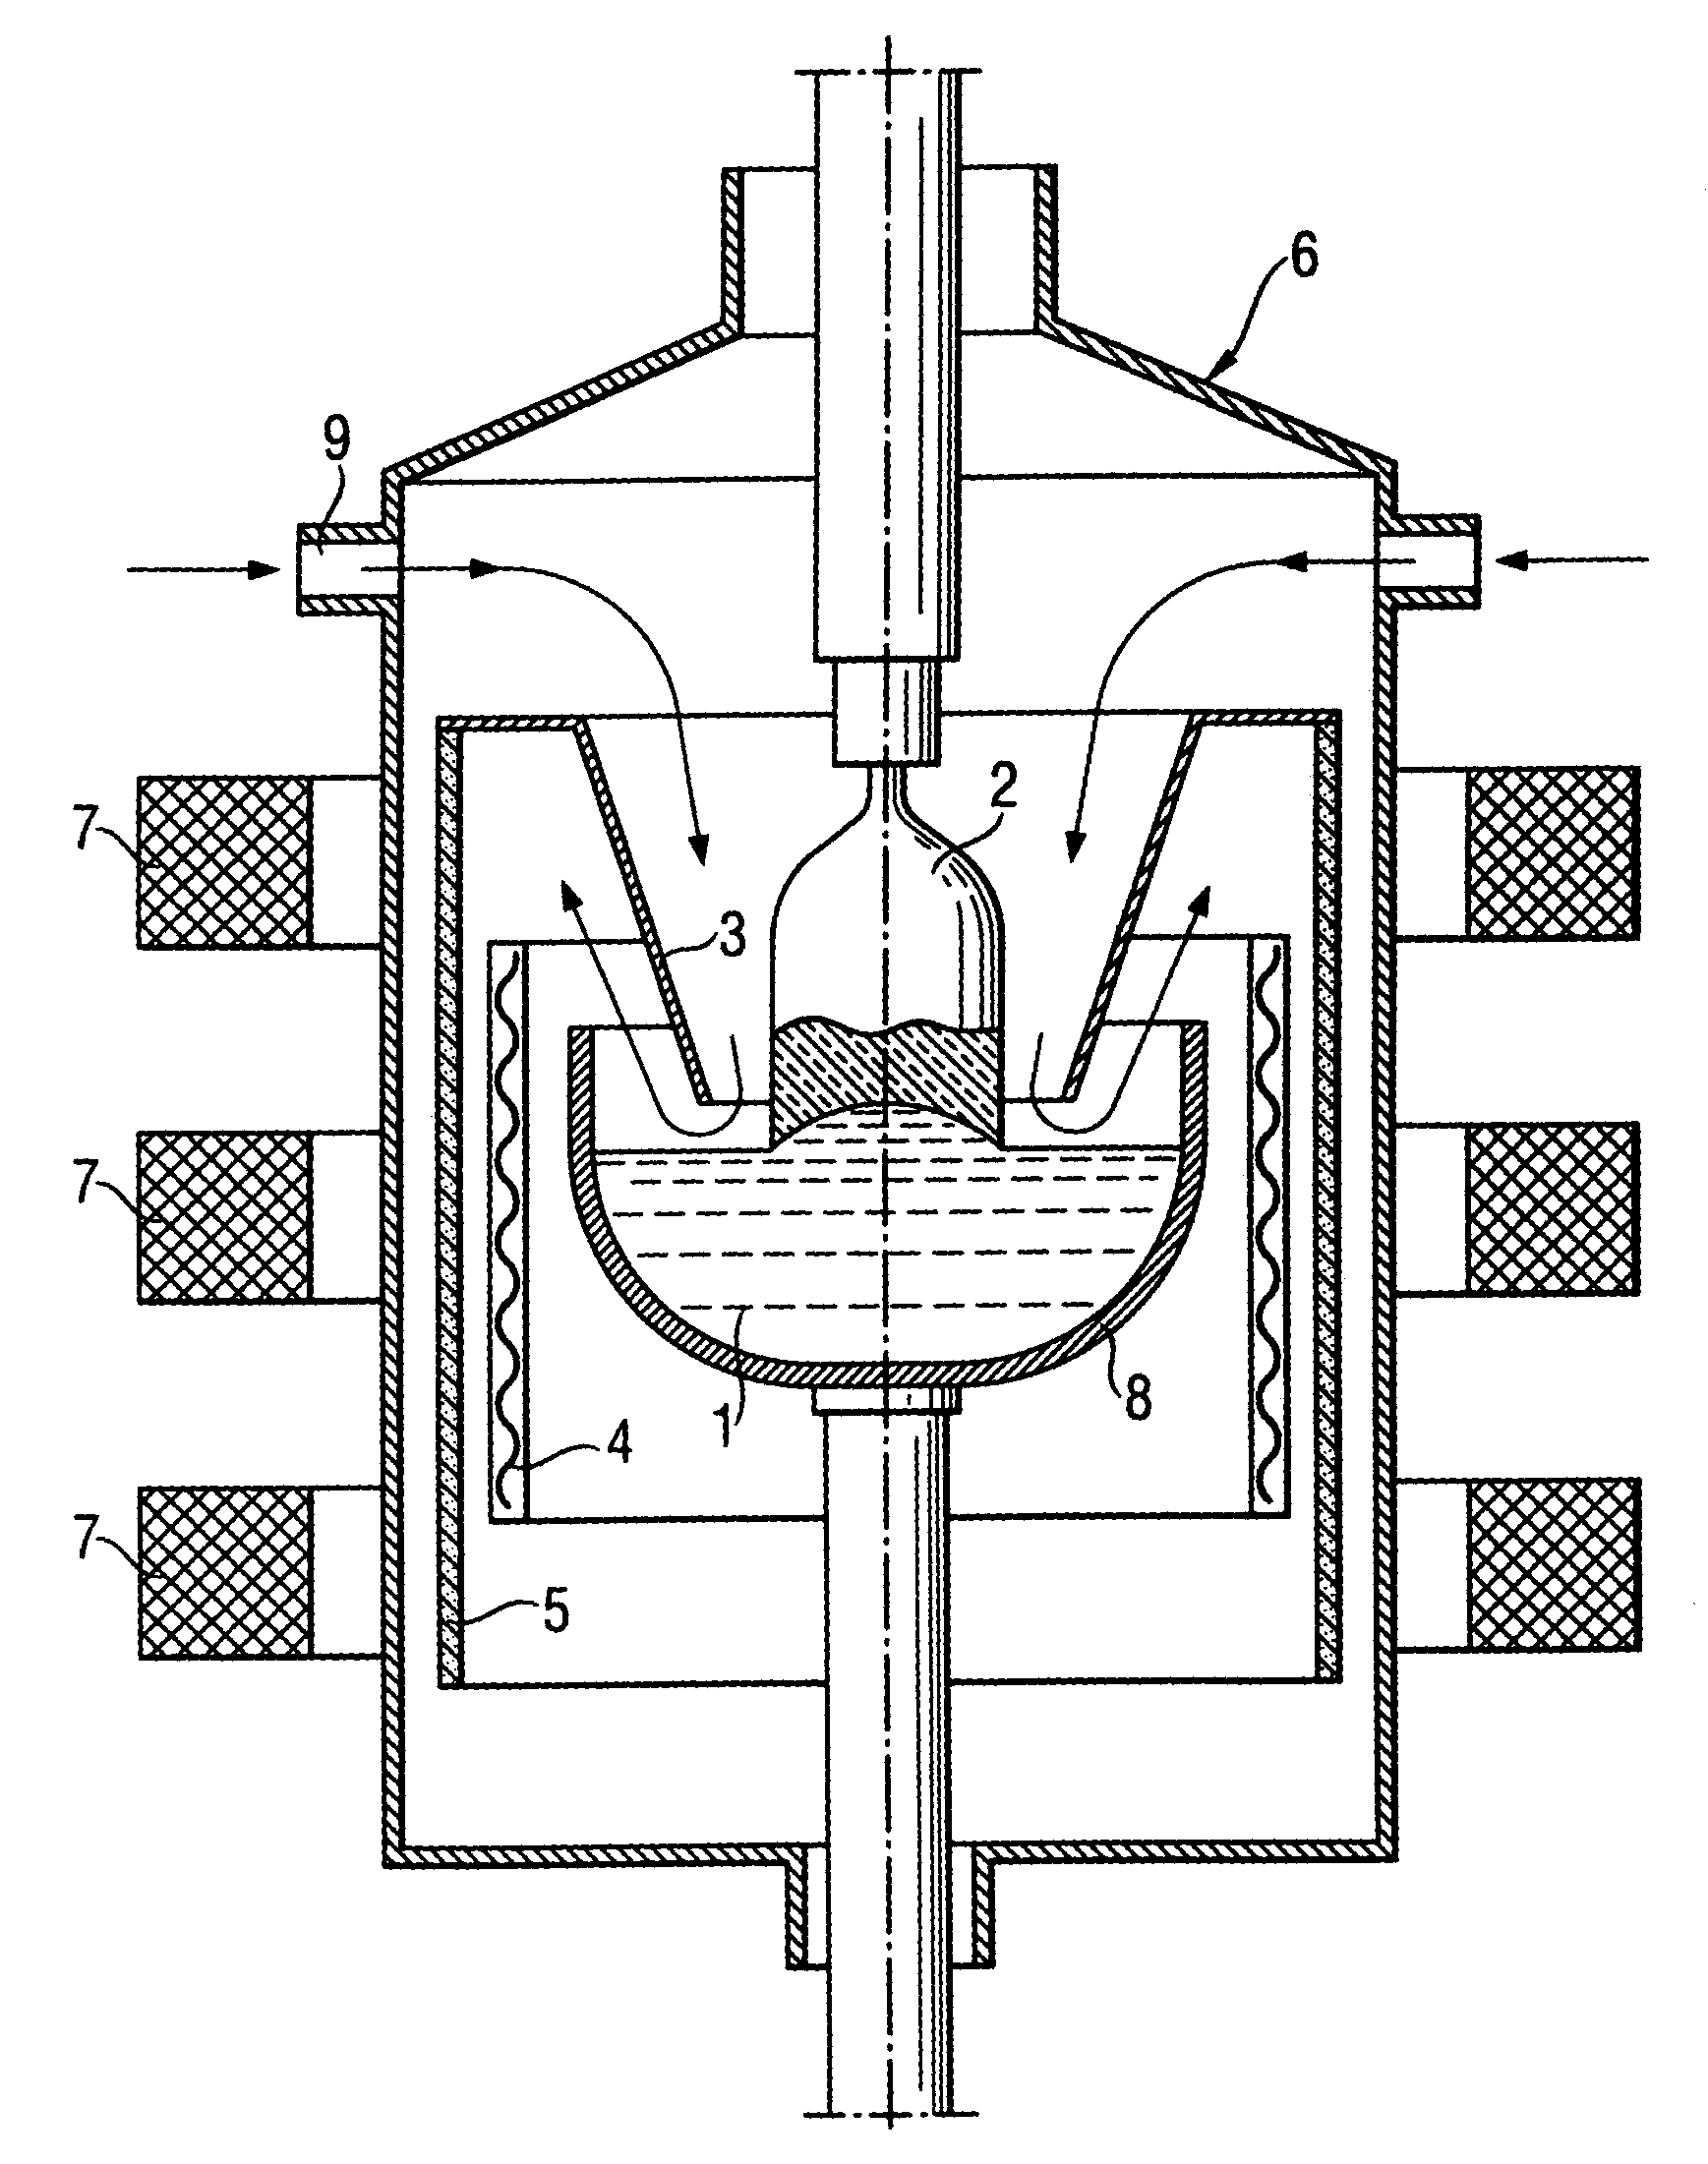 Process and apparatus for producing a silicon single crystal